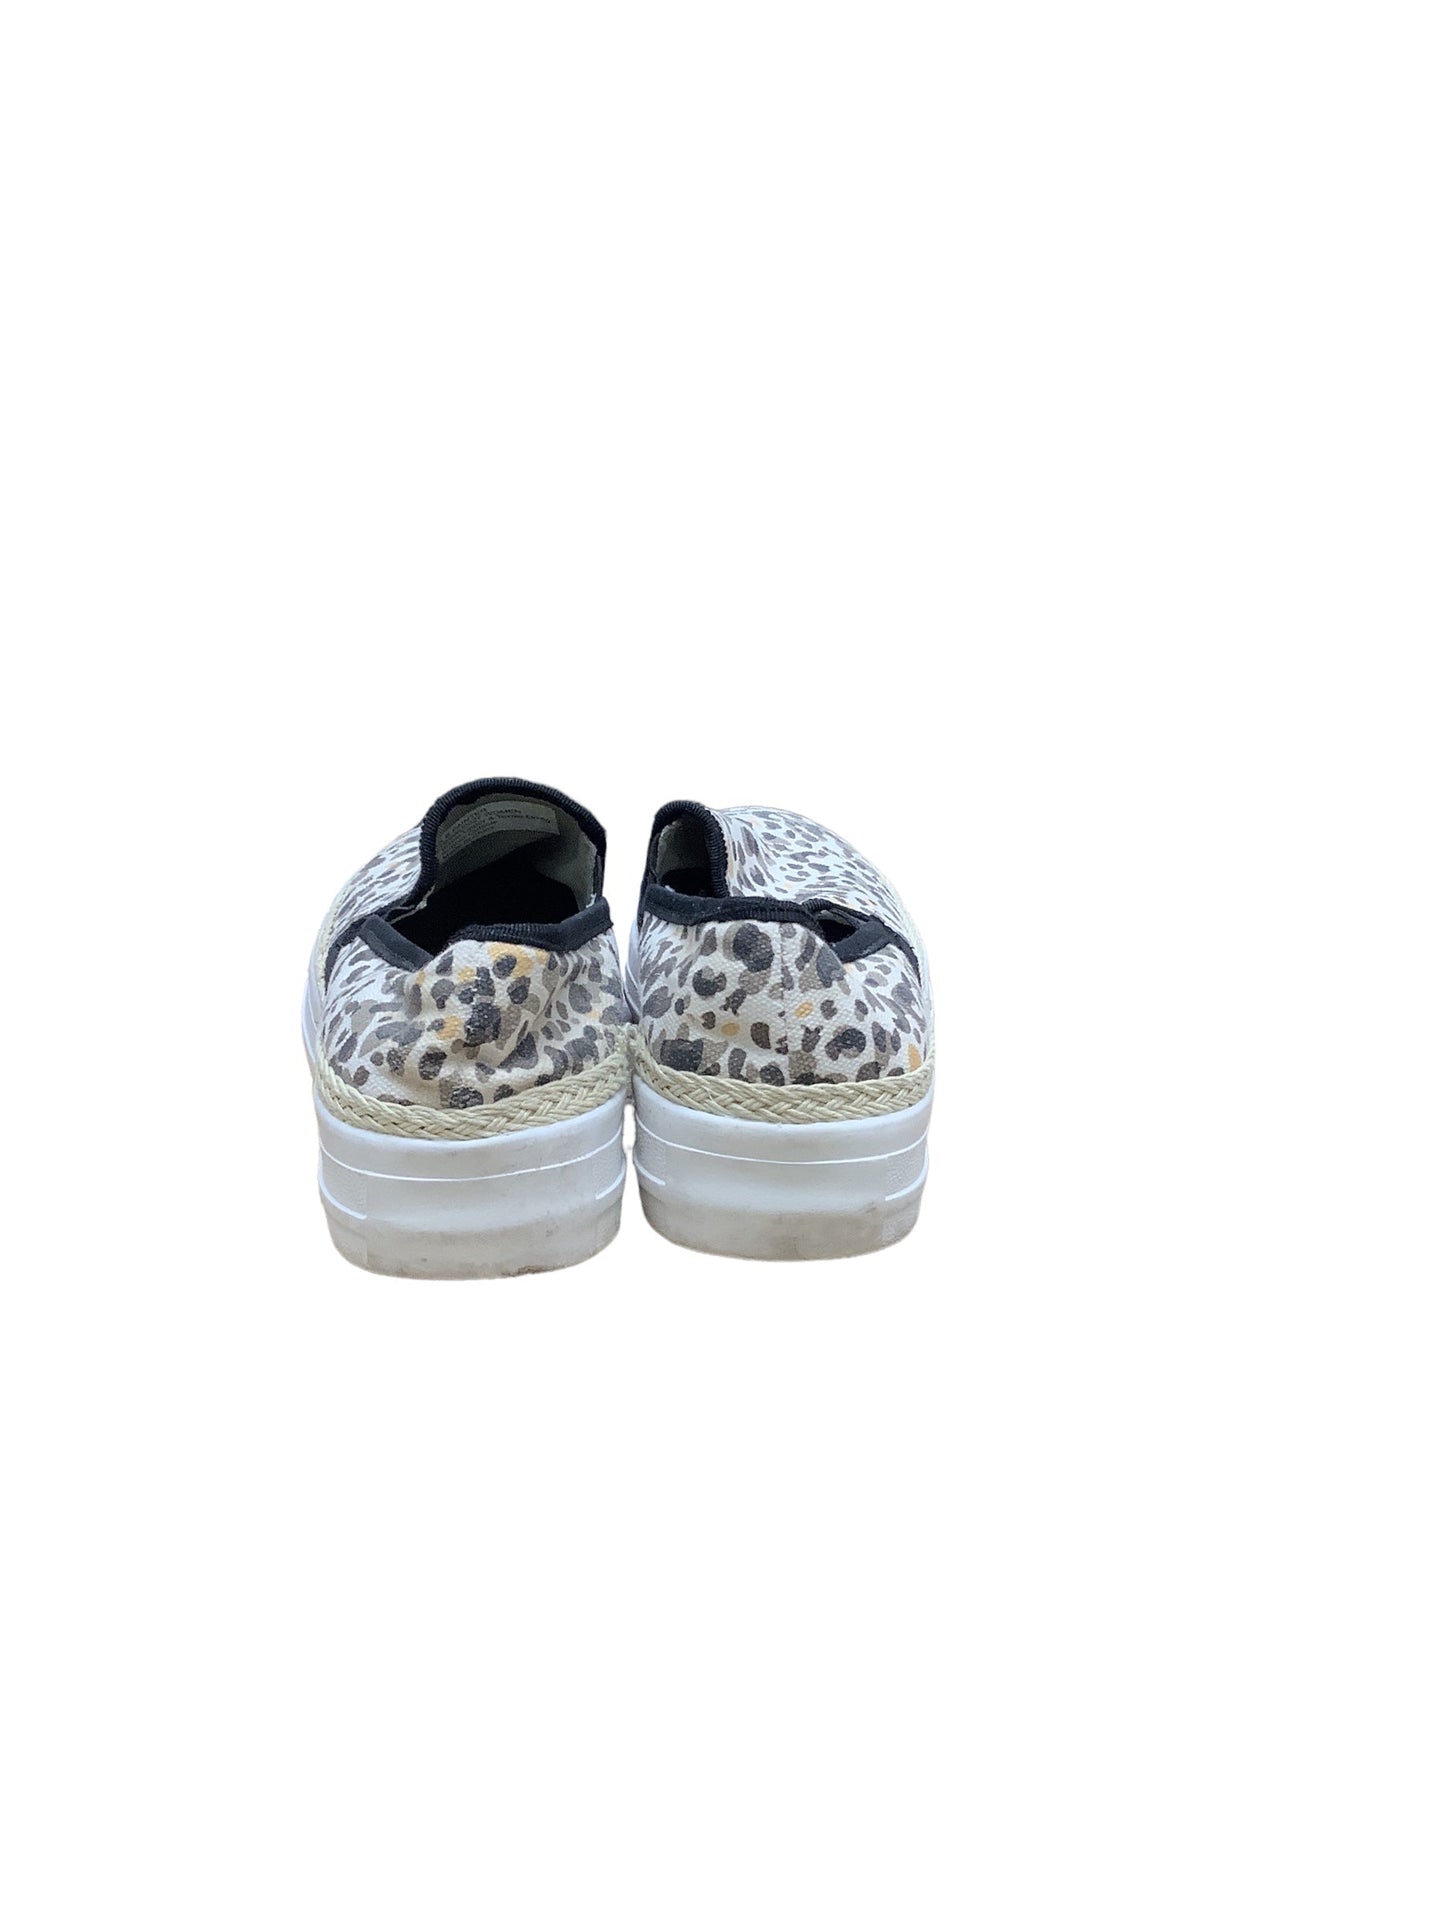 Shoes Sneakers By Tommy Bahama  Size: 6